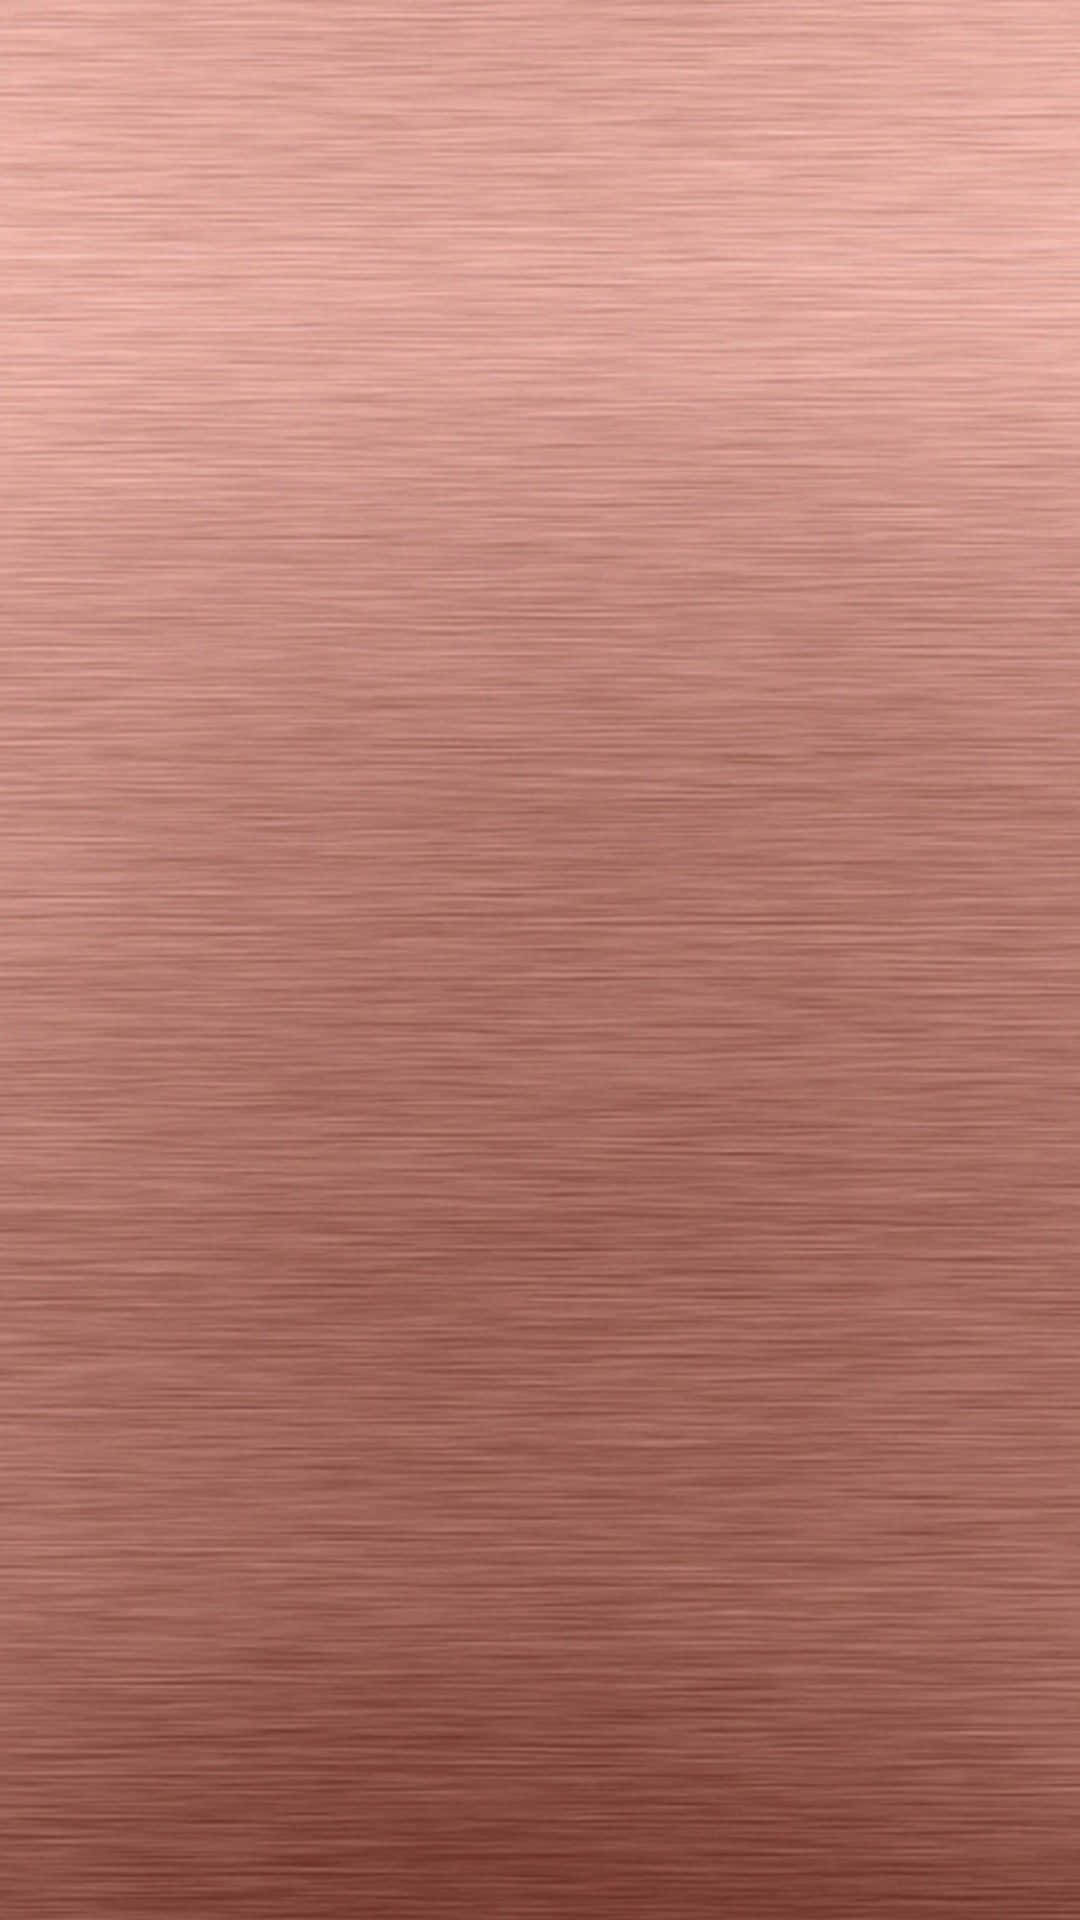 A Copper Textured Background